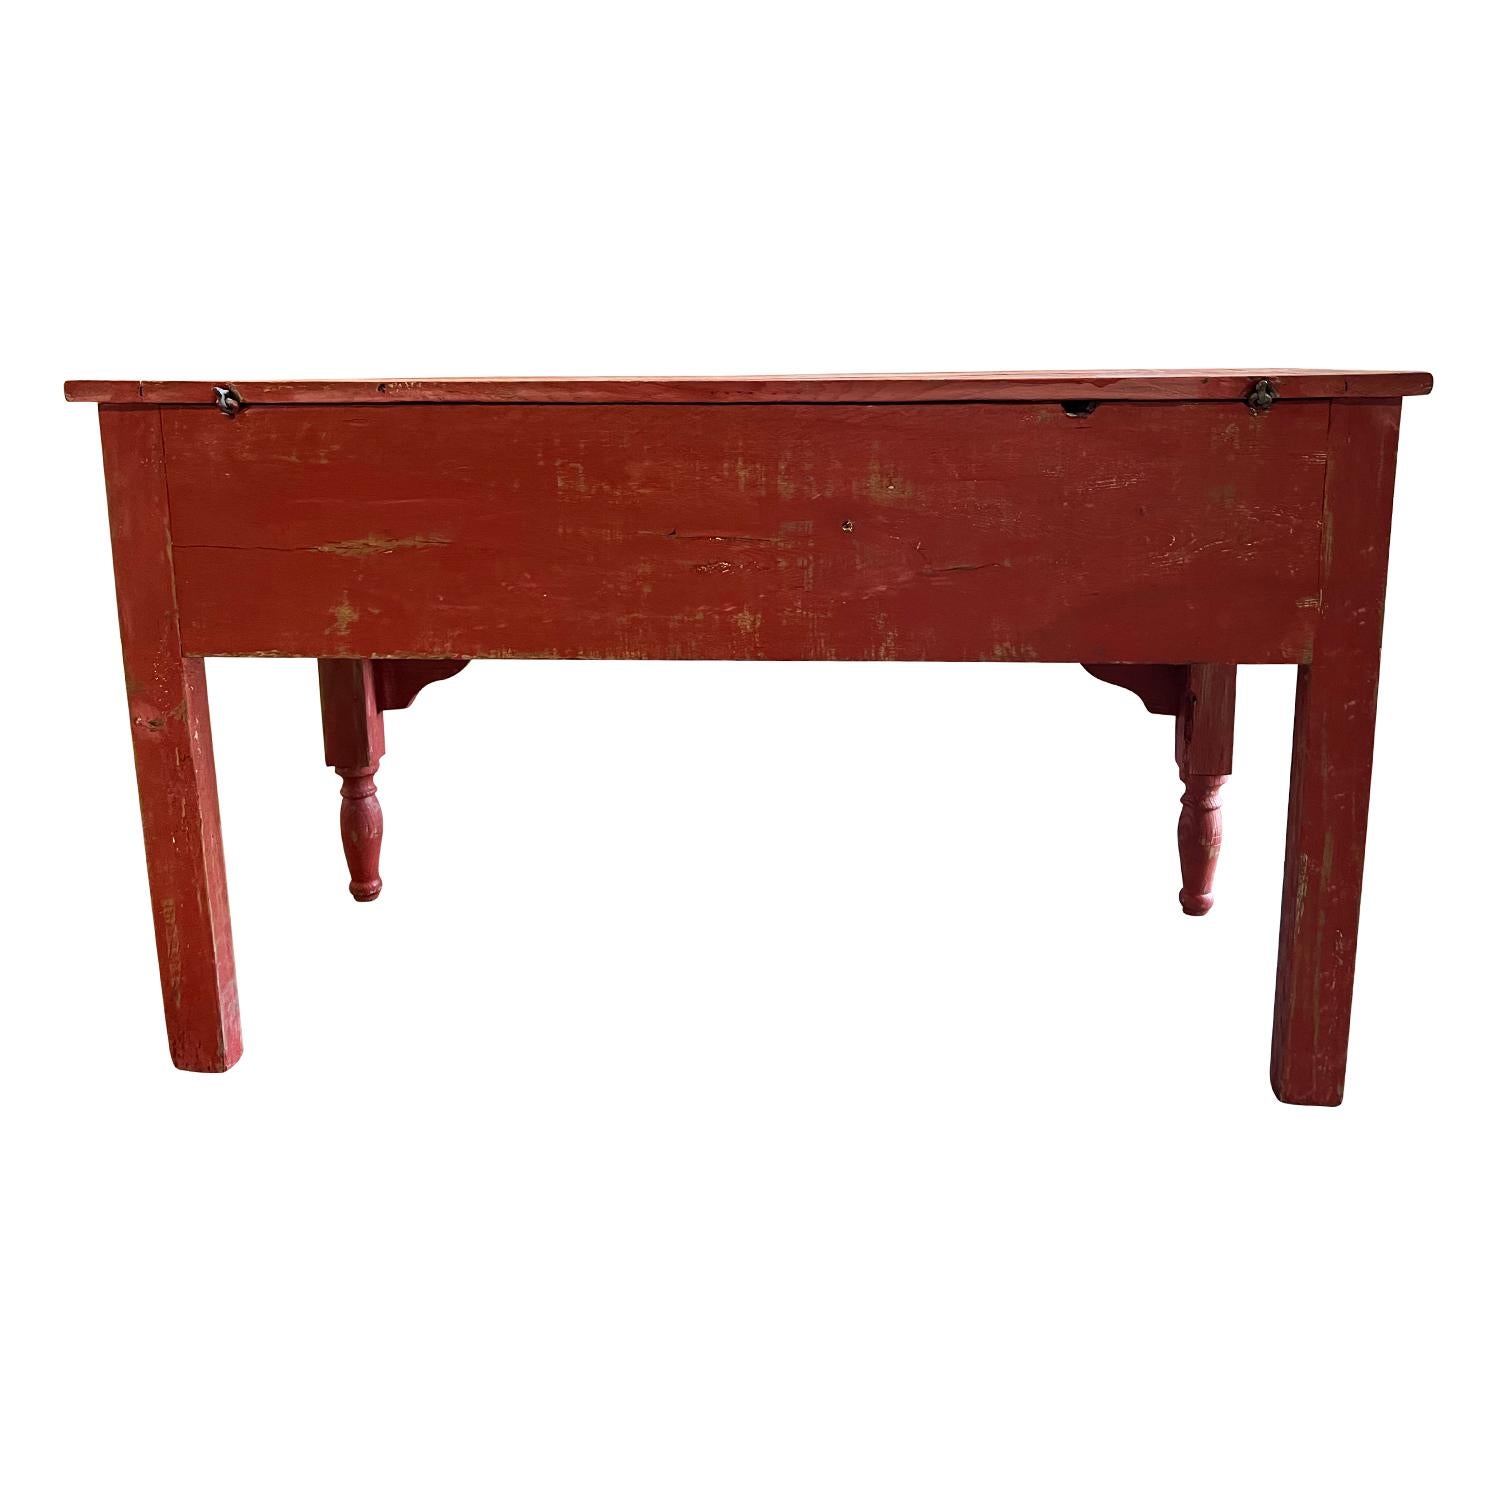 Hand-Painted 19th Century Red French Antique Oakwood Console Table, Provencal Kitchen Table For Sale